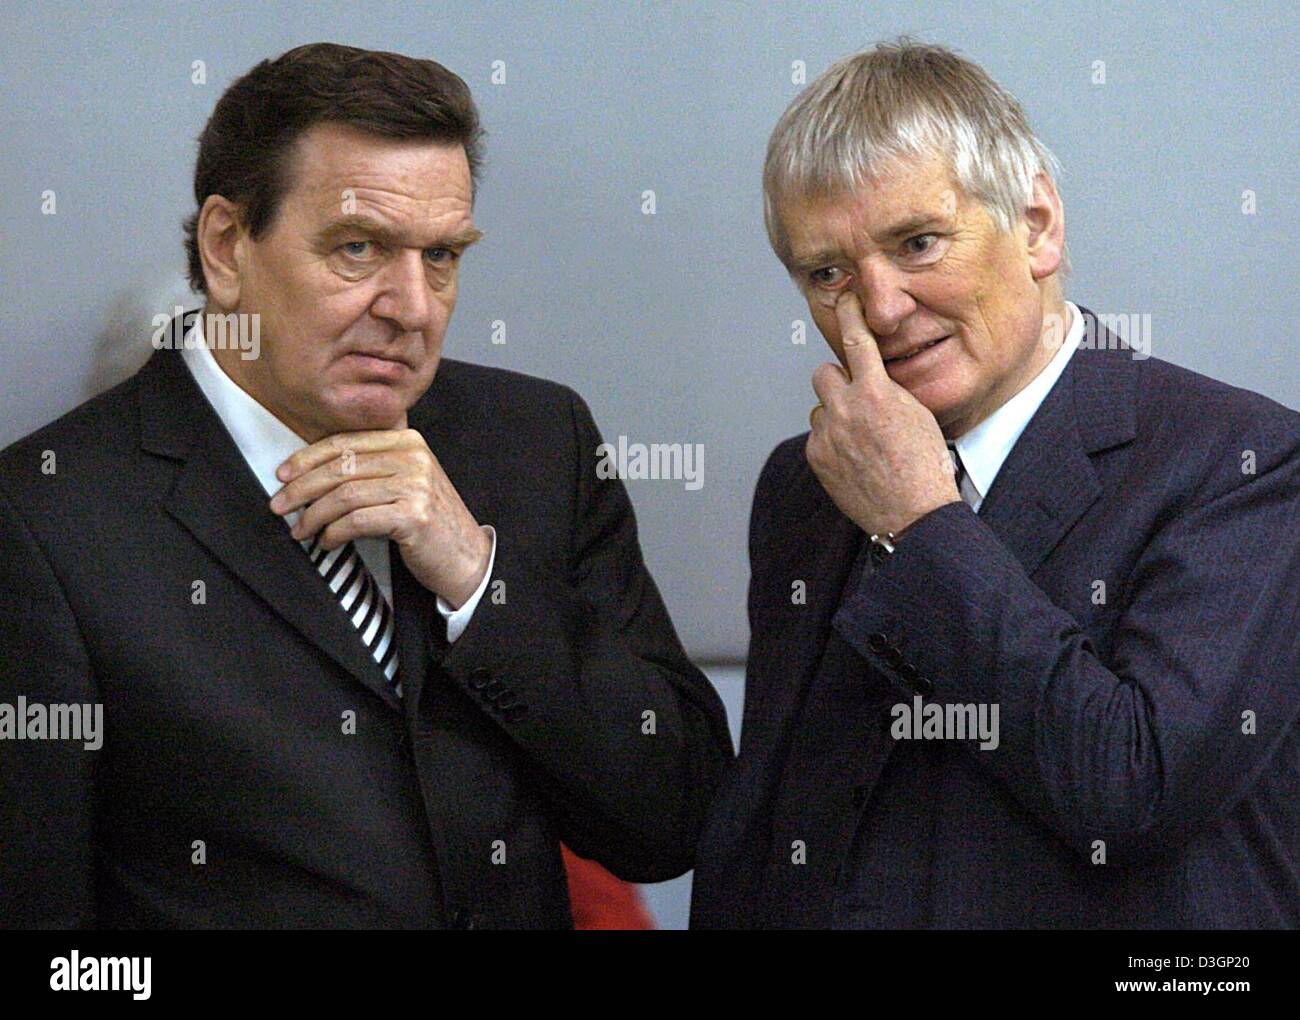 (dpa) - German Chancellor Gerhard Schroeder (L) talks to Interior Minister Otto Schily (R) in the Bundestag, the lower house of parliament, in Berlin, on Thursday, 11 March 2004. Germany's parliament Thursday approved a pension reform which will cut state pensions in the coming years despite unease among some members of the Social Democratic Party. The reform aims to keep German st Stock Photo